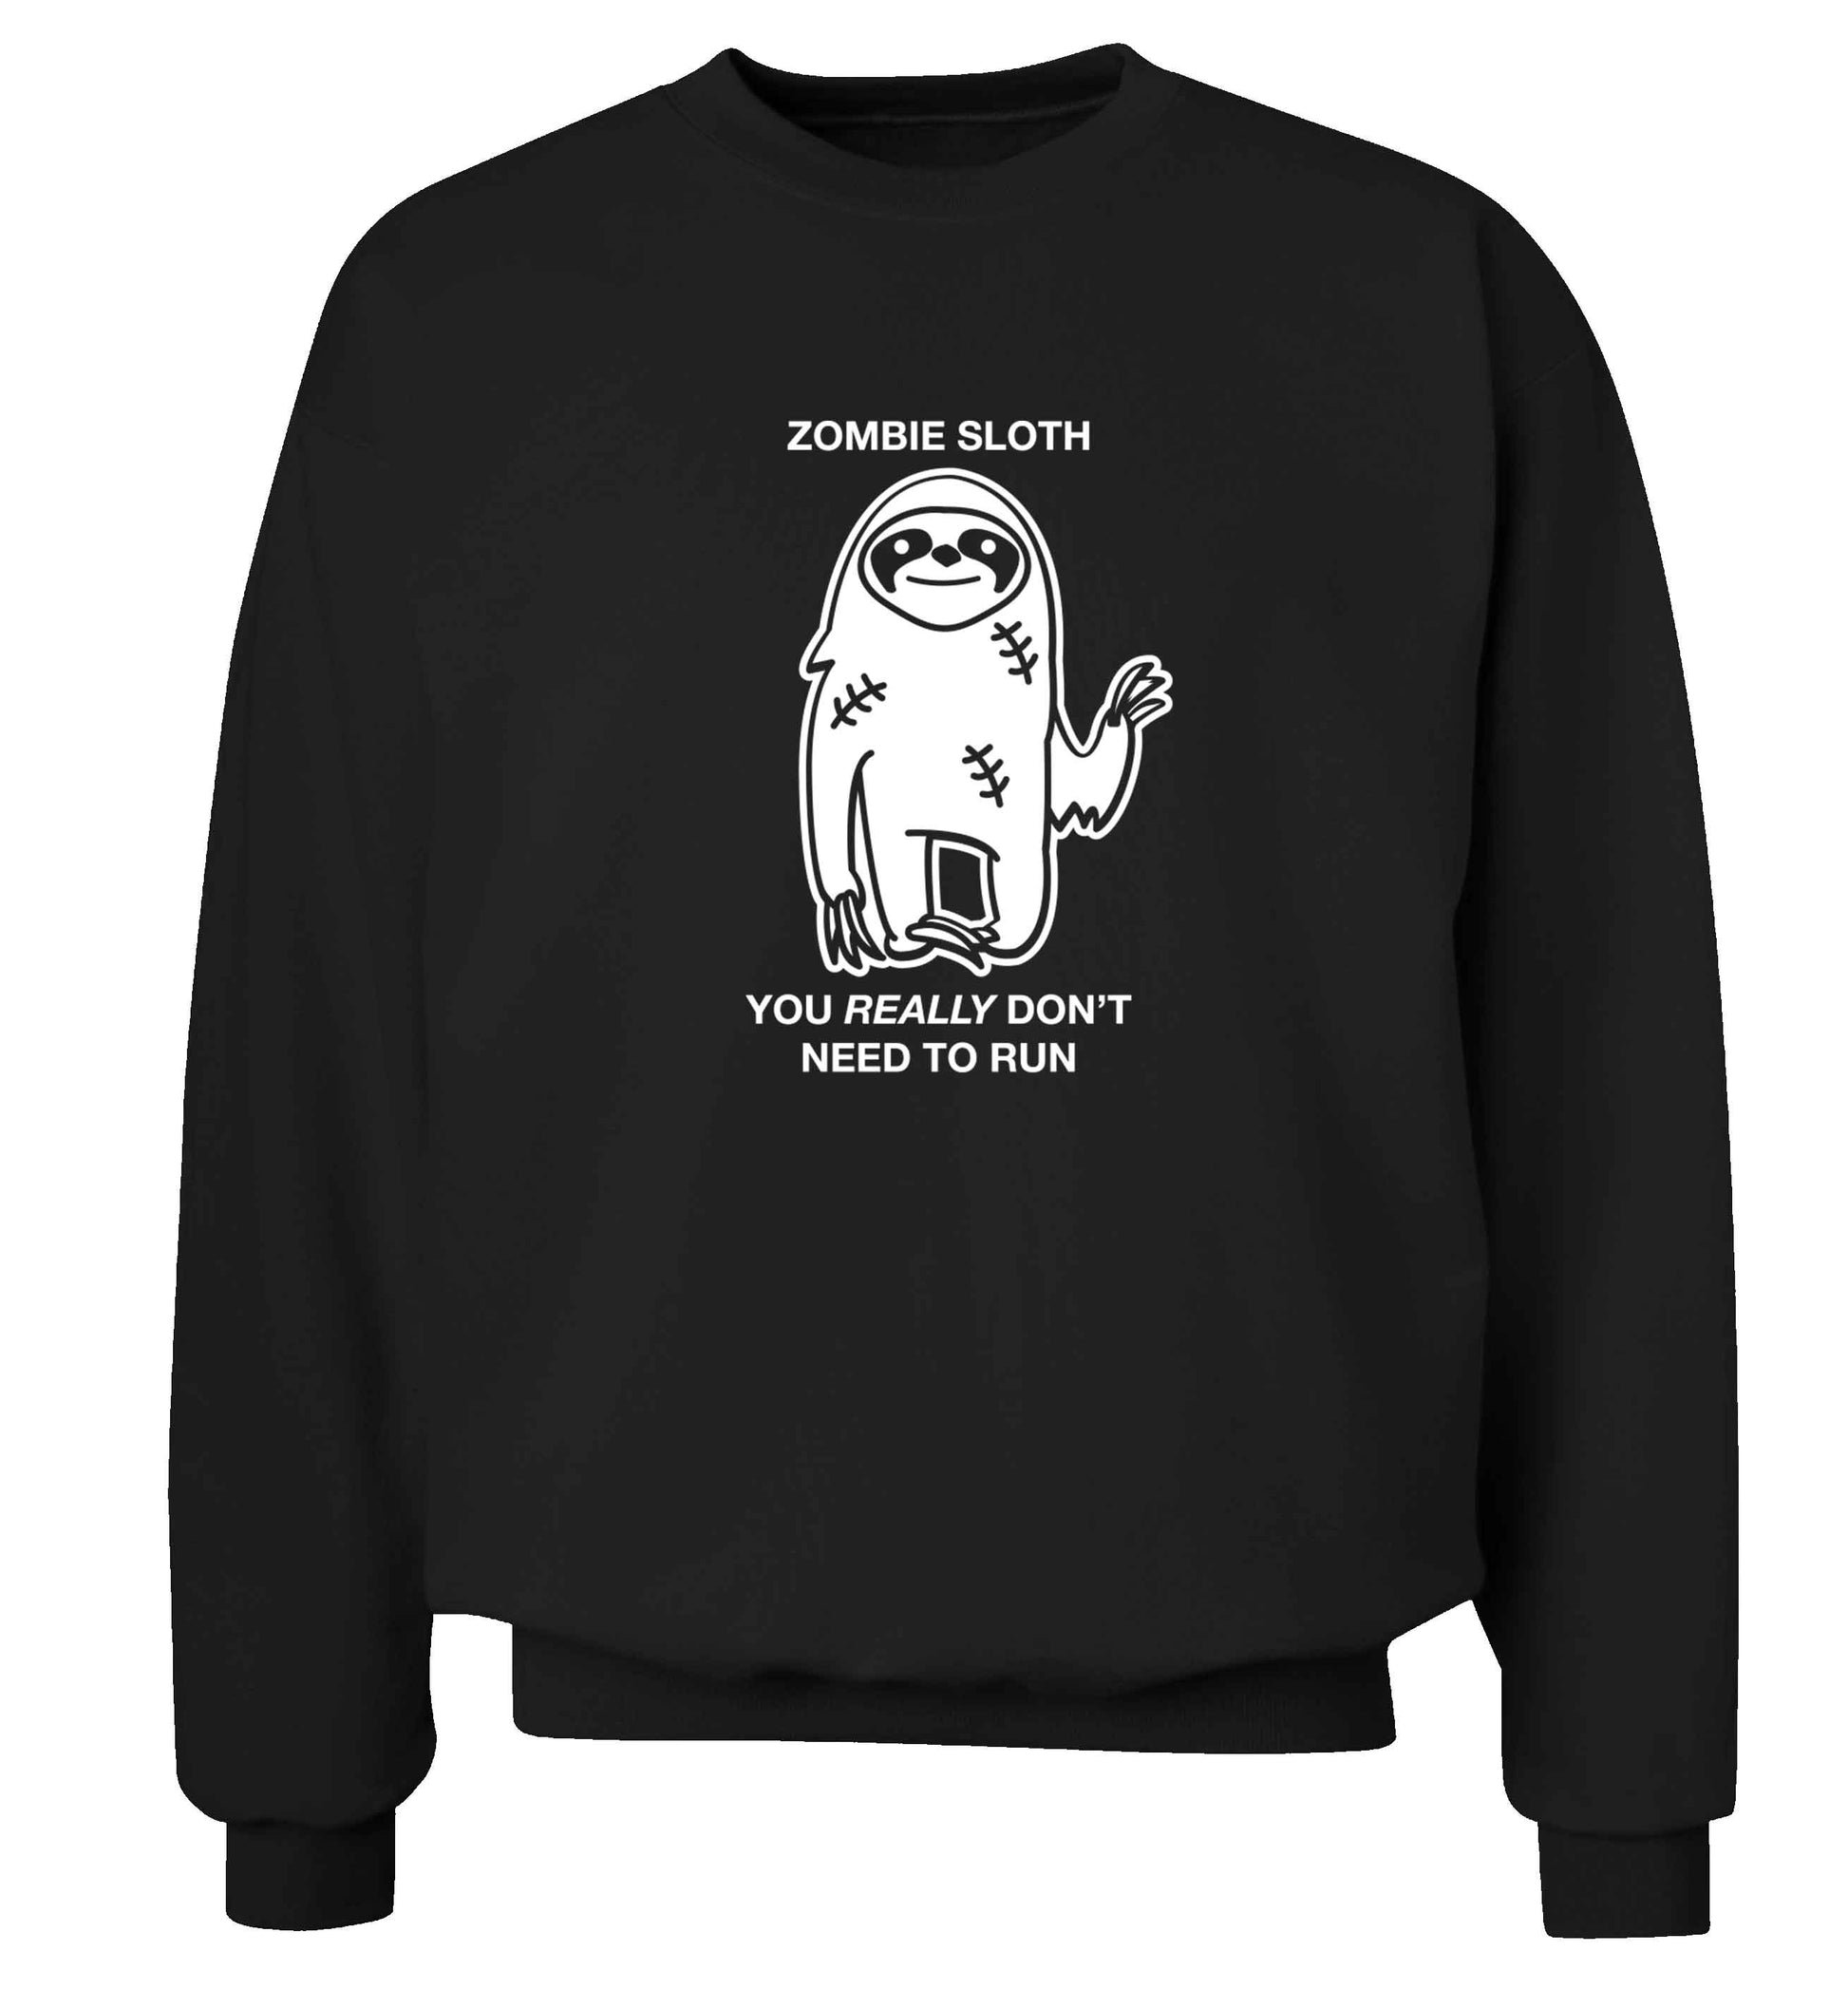 Zombie sloth you really don't need to run adult's unisex black sweater 2XL